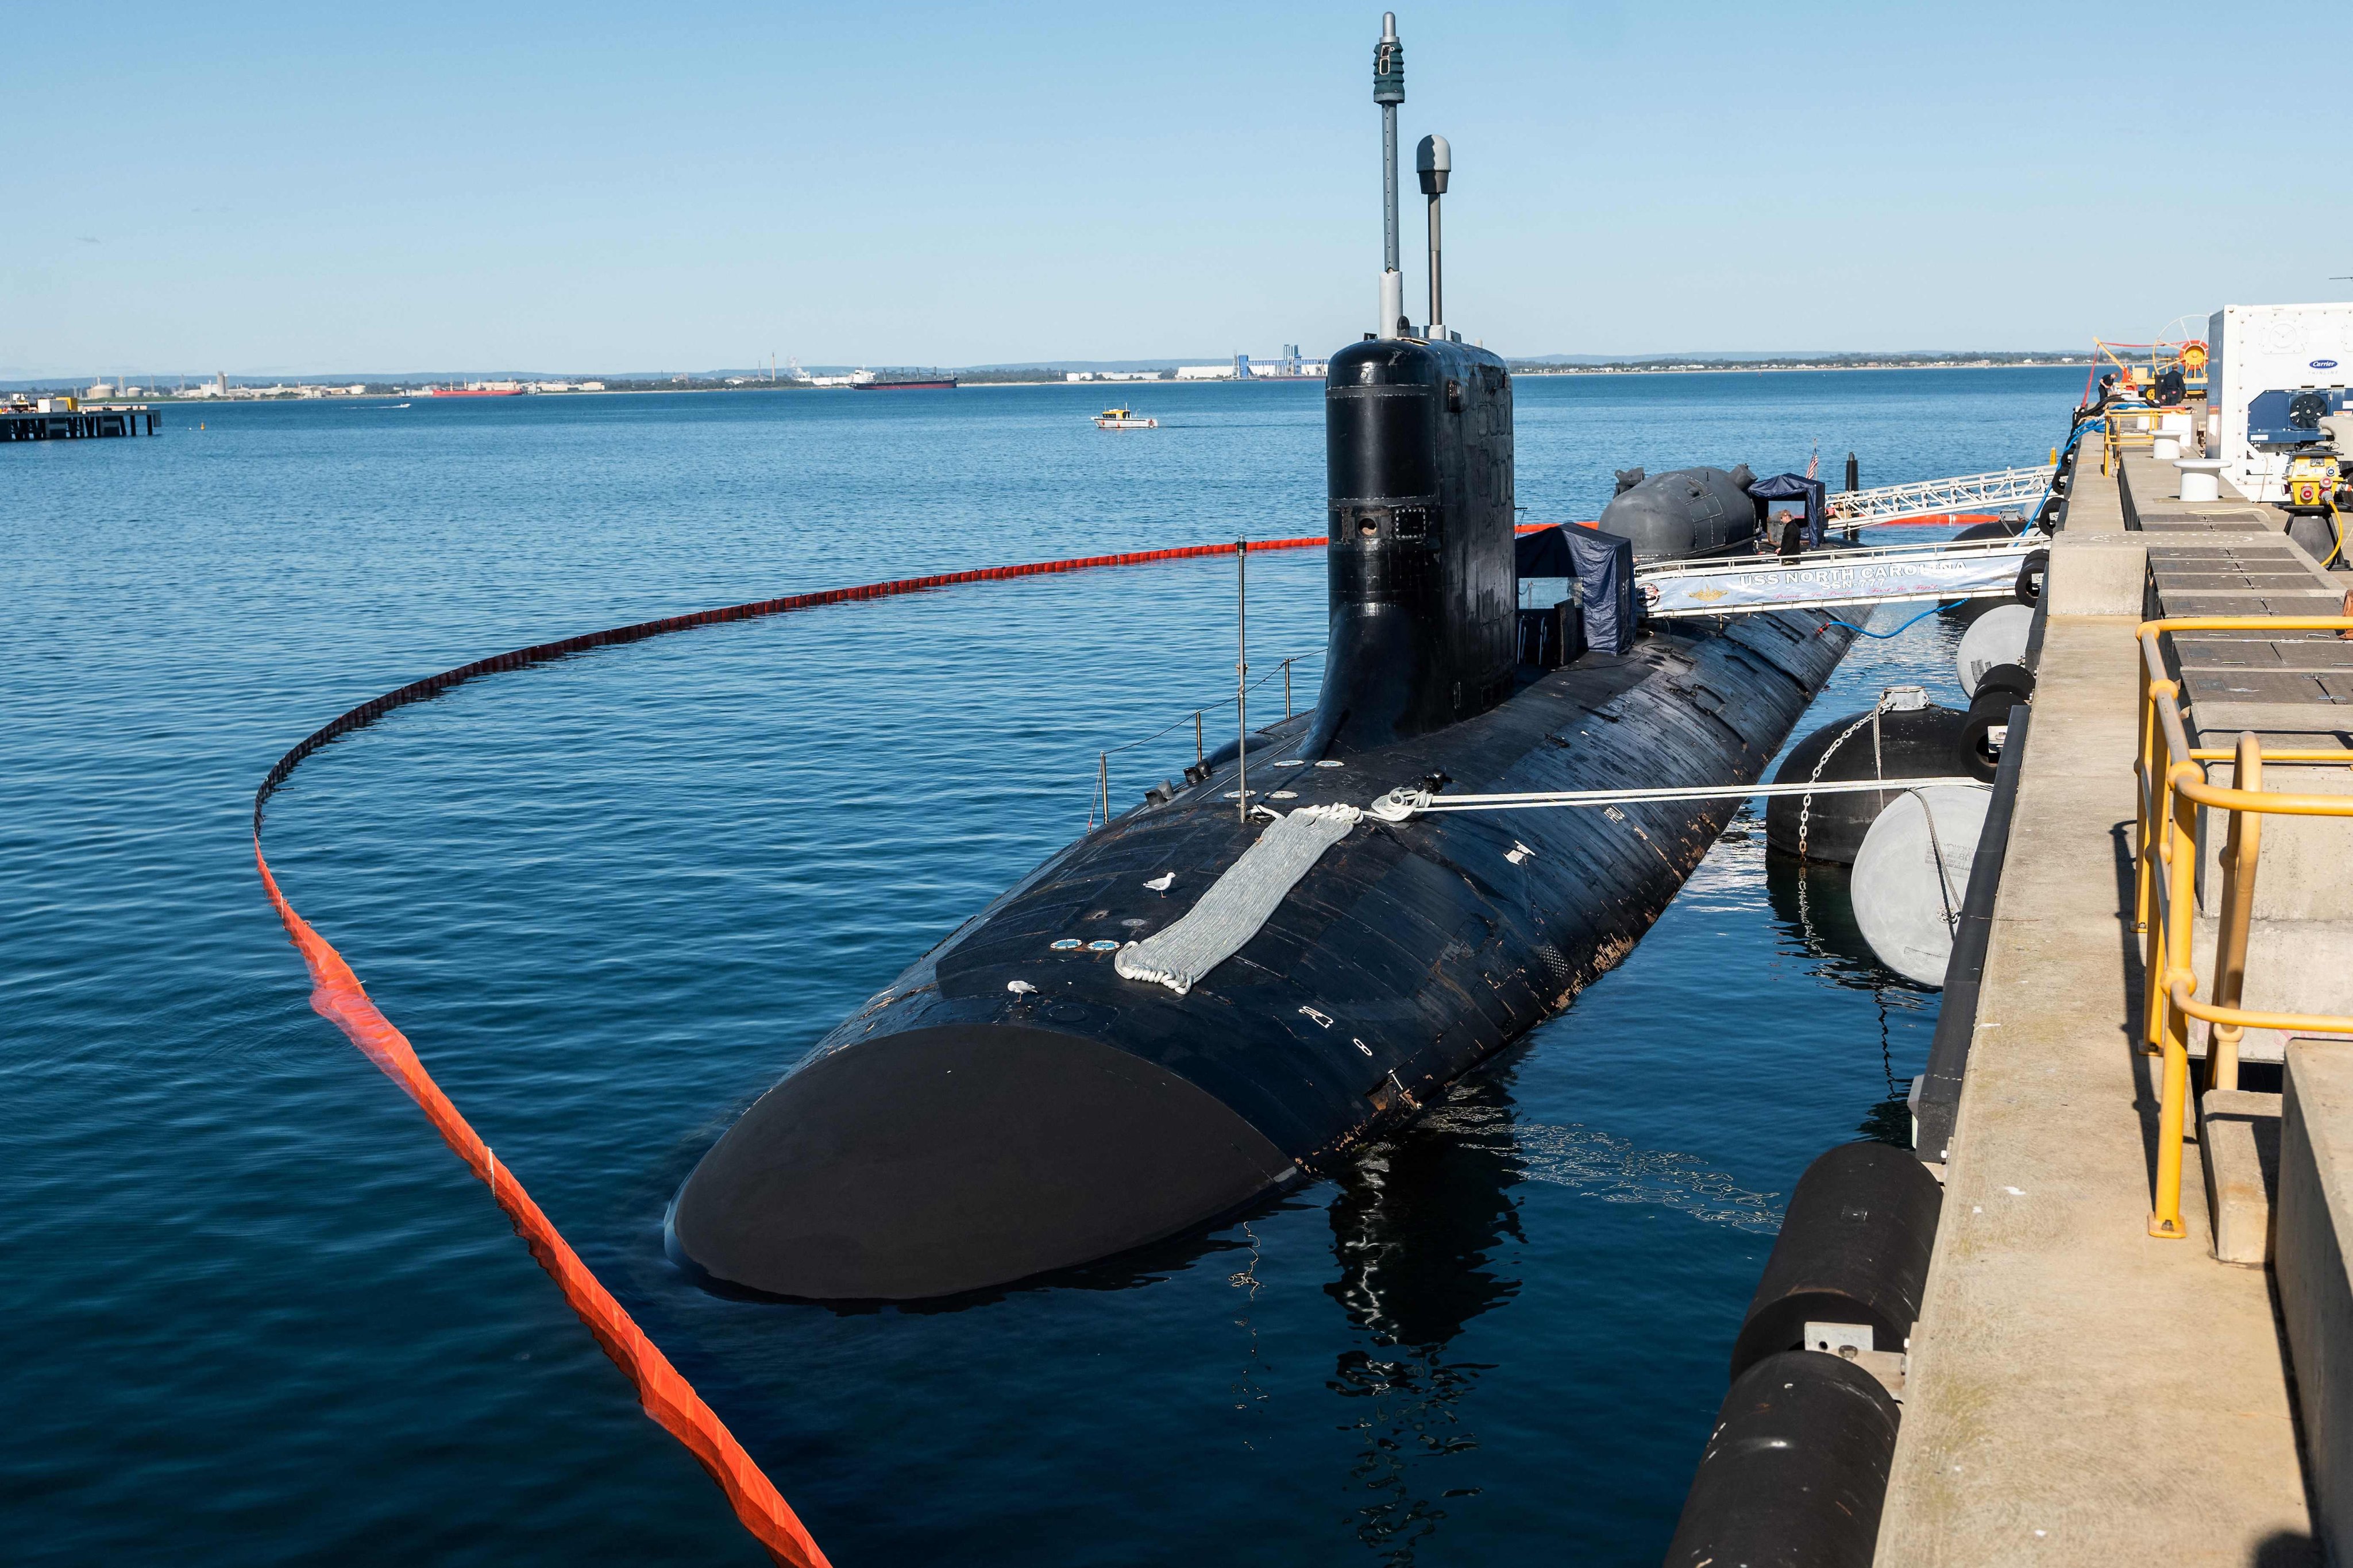 A US navy Virginia-class submarine docked at the HMAS Stirling port in Rockingham, Australia. Photo: AFP